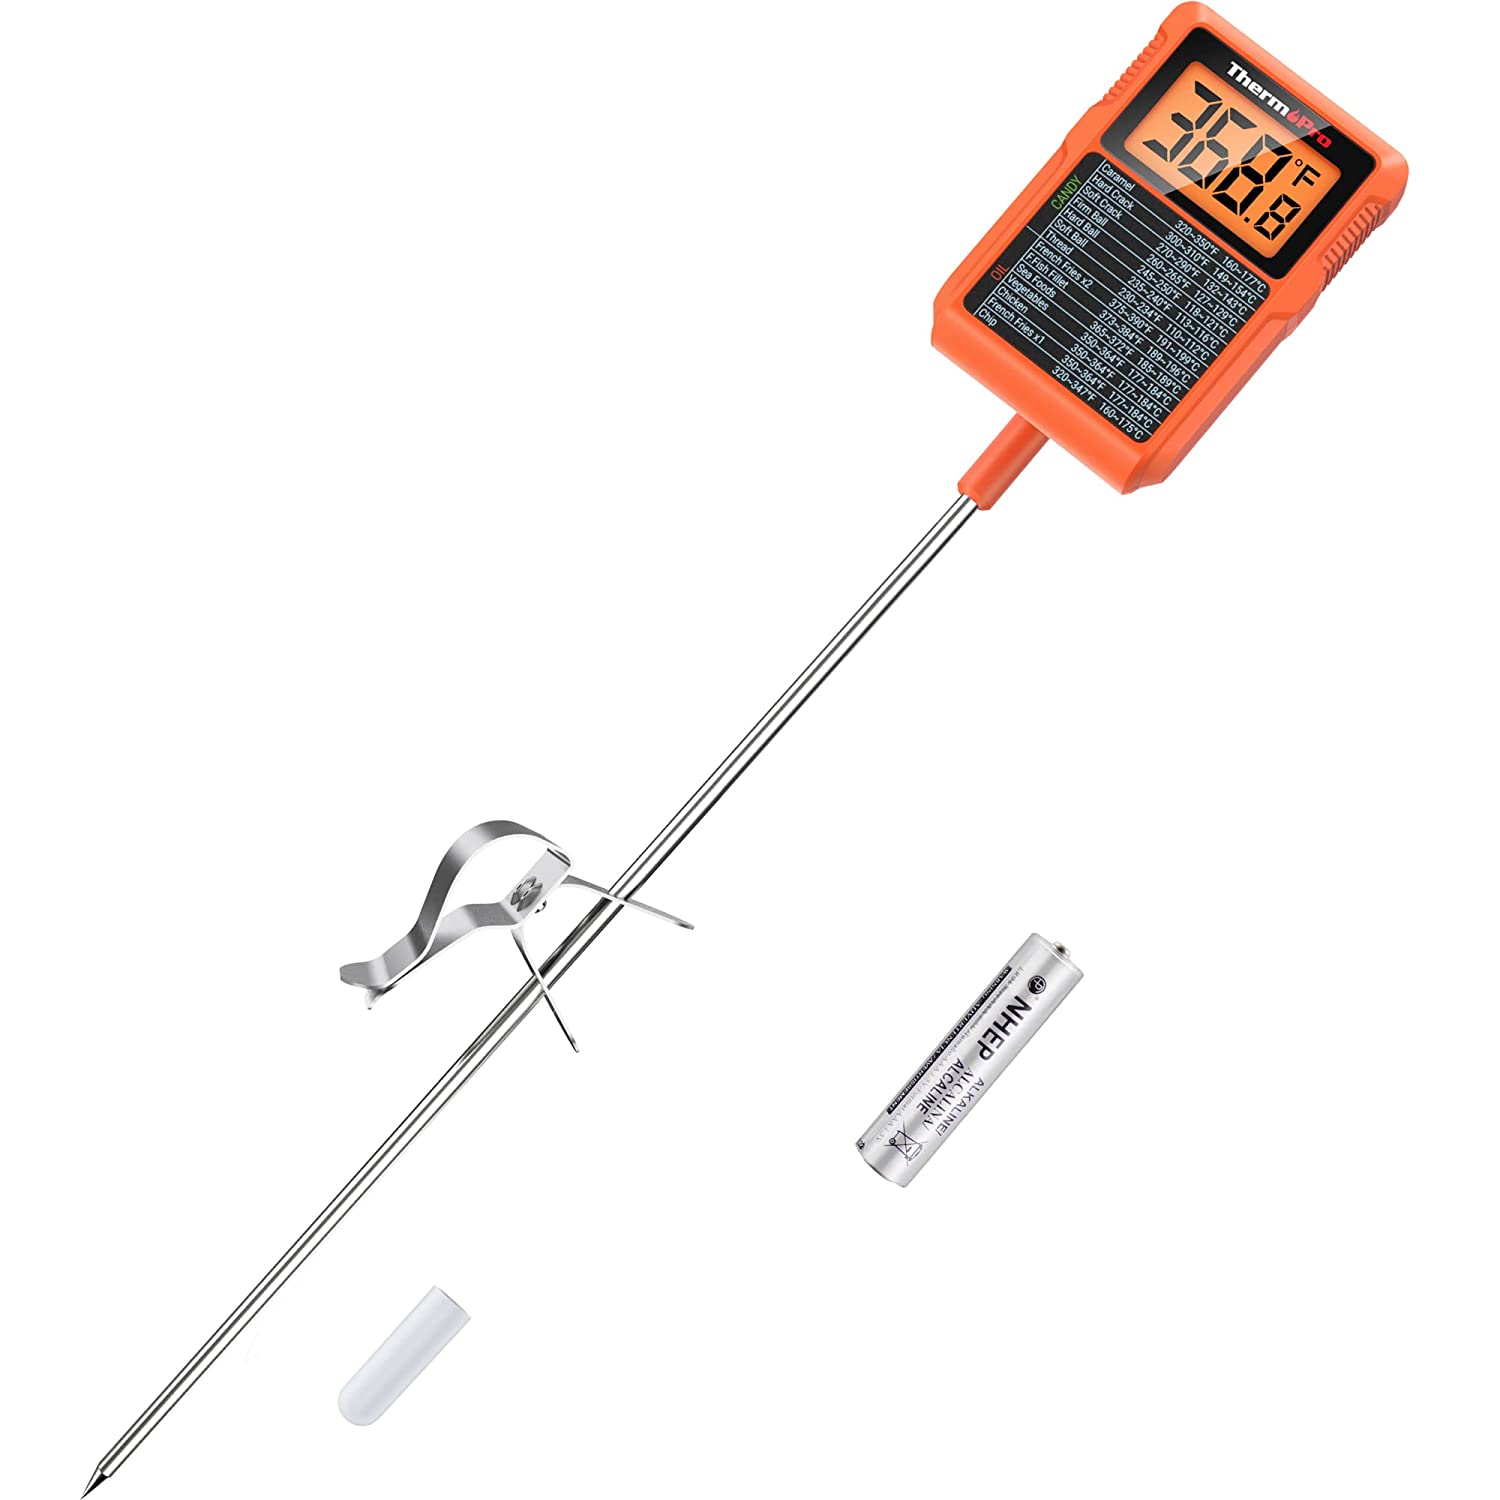 ThermoPro TP510 Waterproof Digital Candy Thermometer